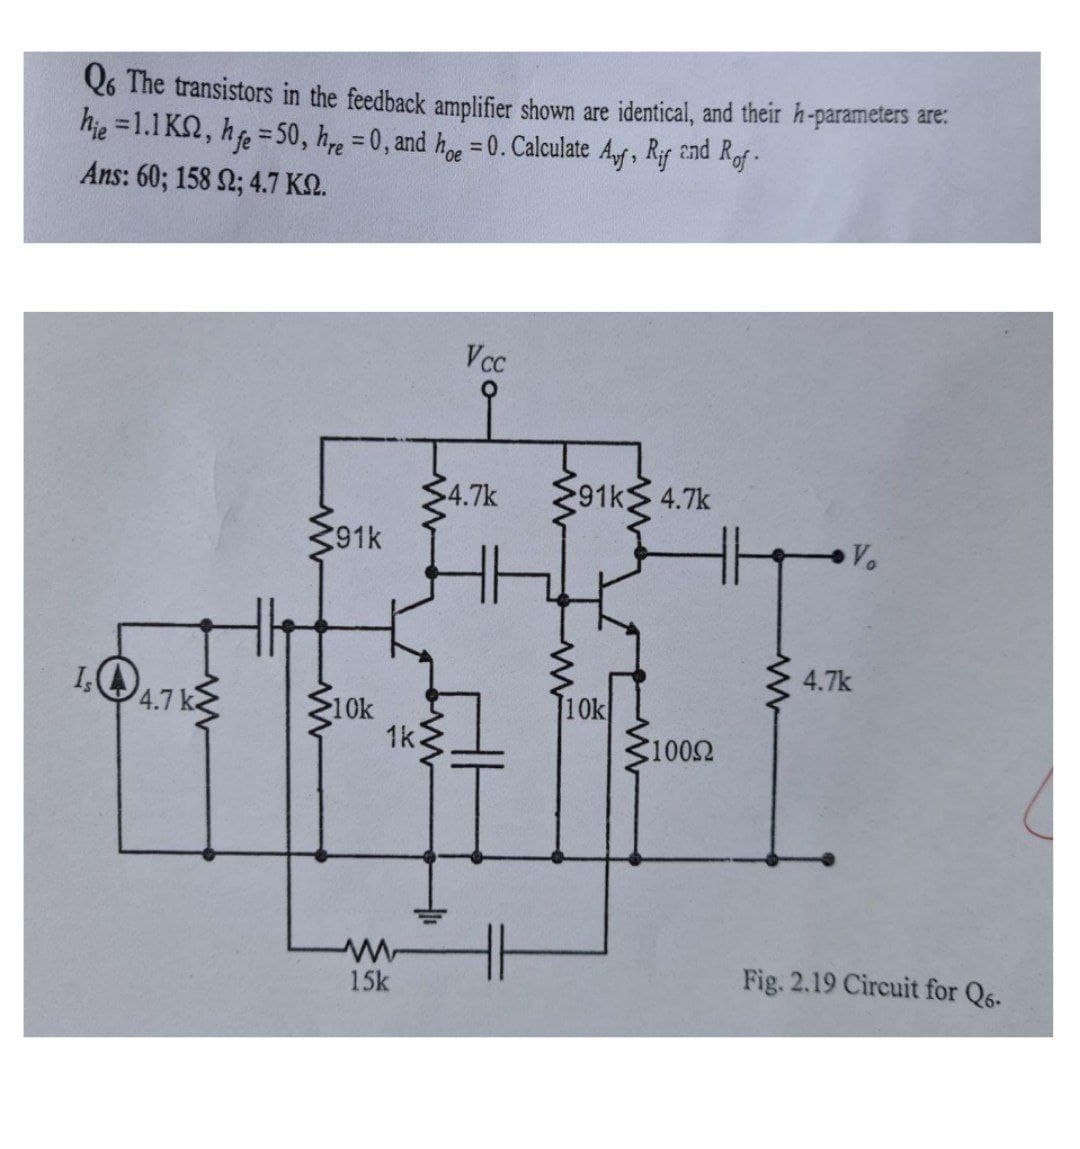 Q6 The transistors in the feedback amplifier shown are identical, and their h-parameters are:
hie =1.1 K2, h = 50, h = 0, and h =0. Calculate Af, Rif 2nd Rf-
Ans: 60; 158 2; 4.7 KN.
Vcc
$4.7k
91k 4.7k
391k
Vo
4.7k
IQ4.1 k
10k
1k.
10k
1002
Fig. 2.19 Circuit for Q6.
15k
